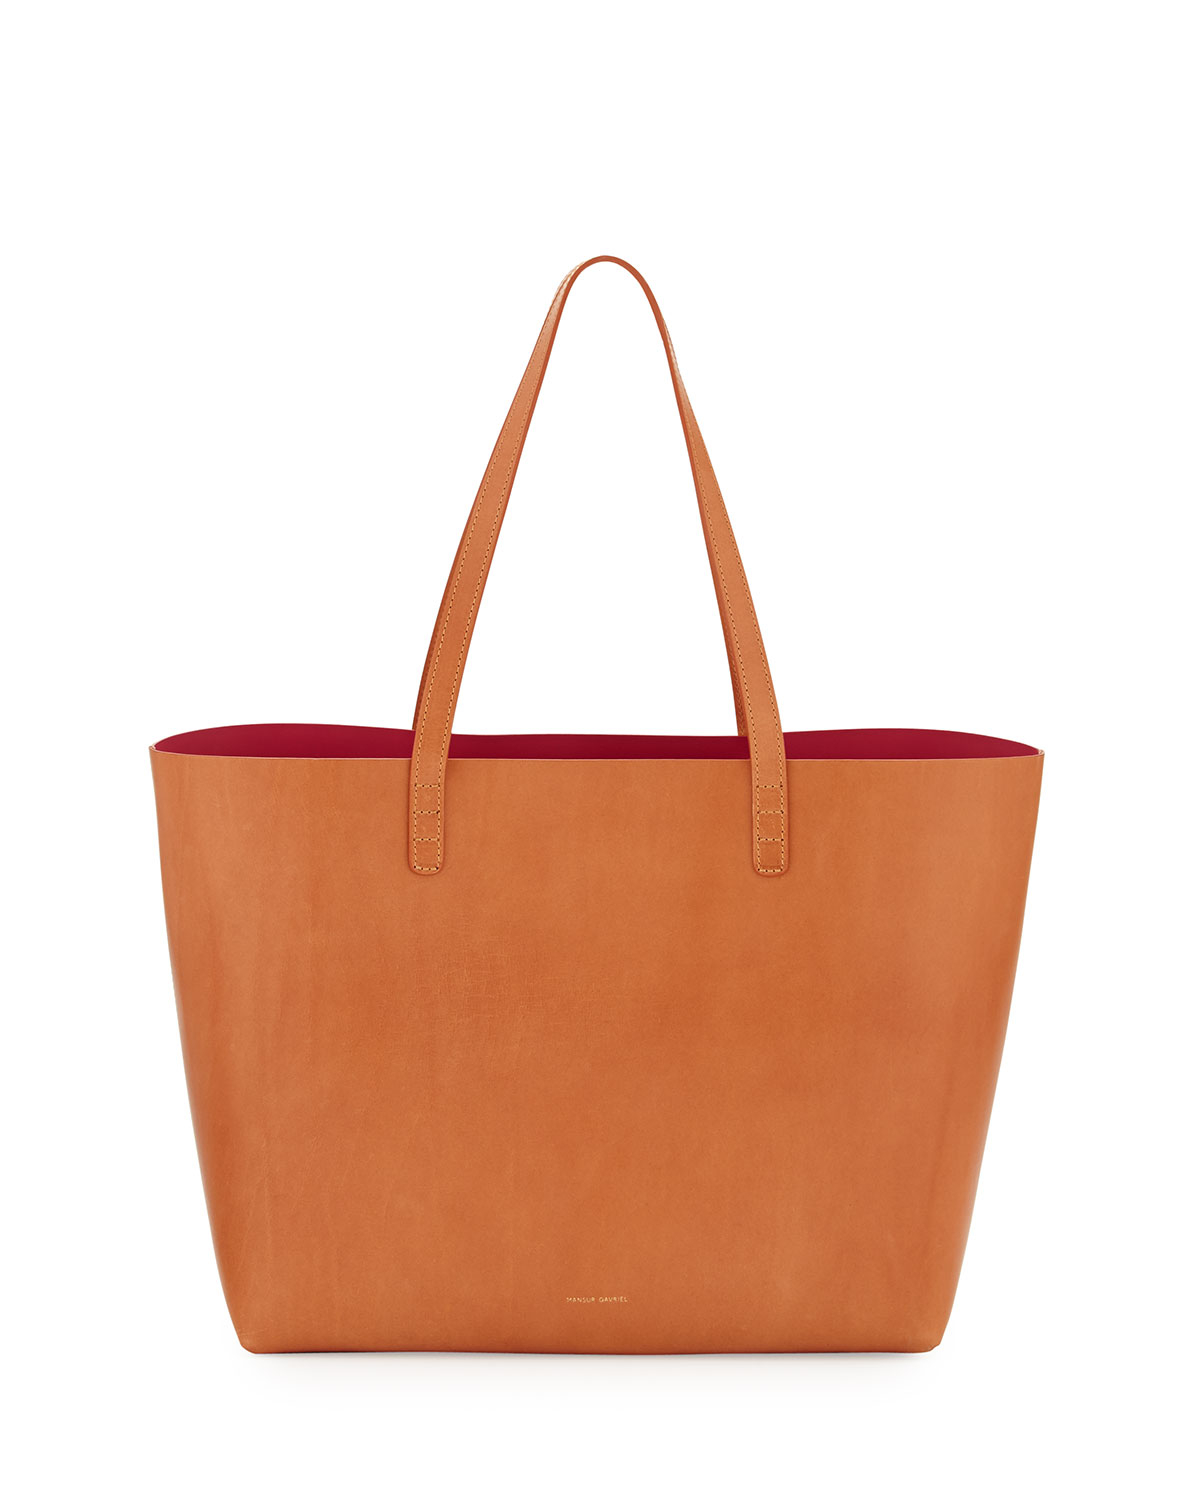 Mansur gavriel Large Leather Tote Bag With Coated Interior in Brown | Lyst